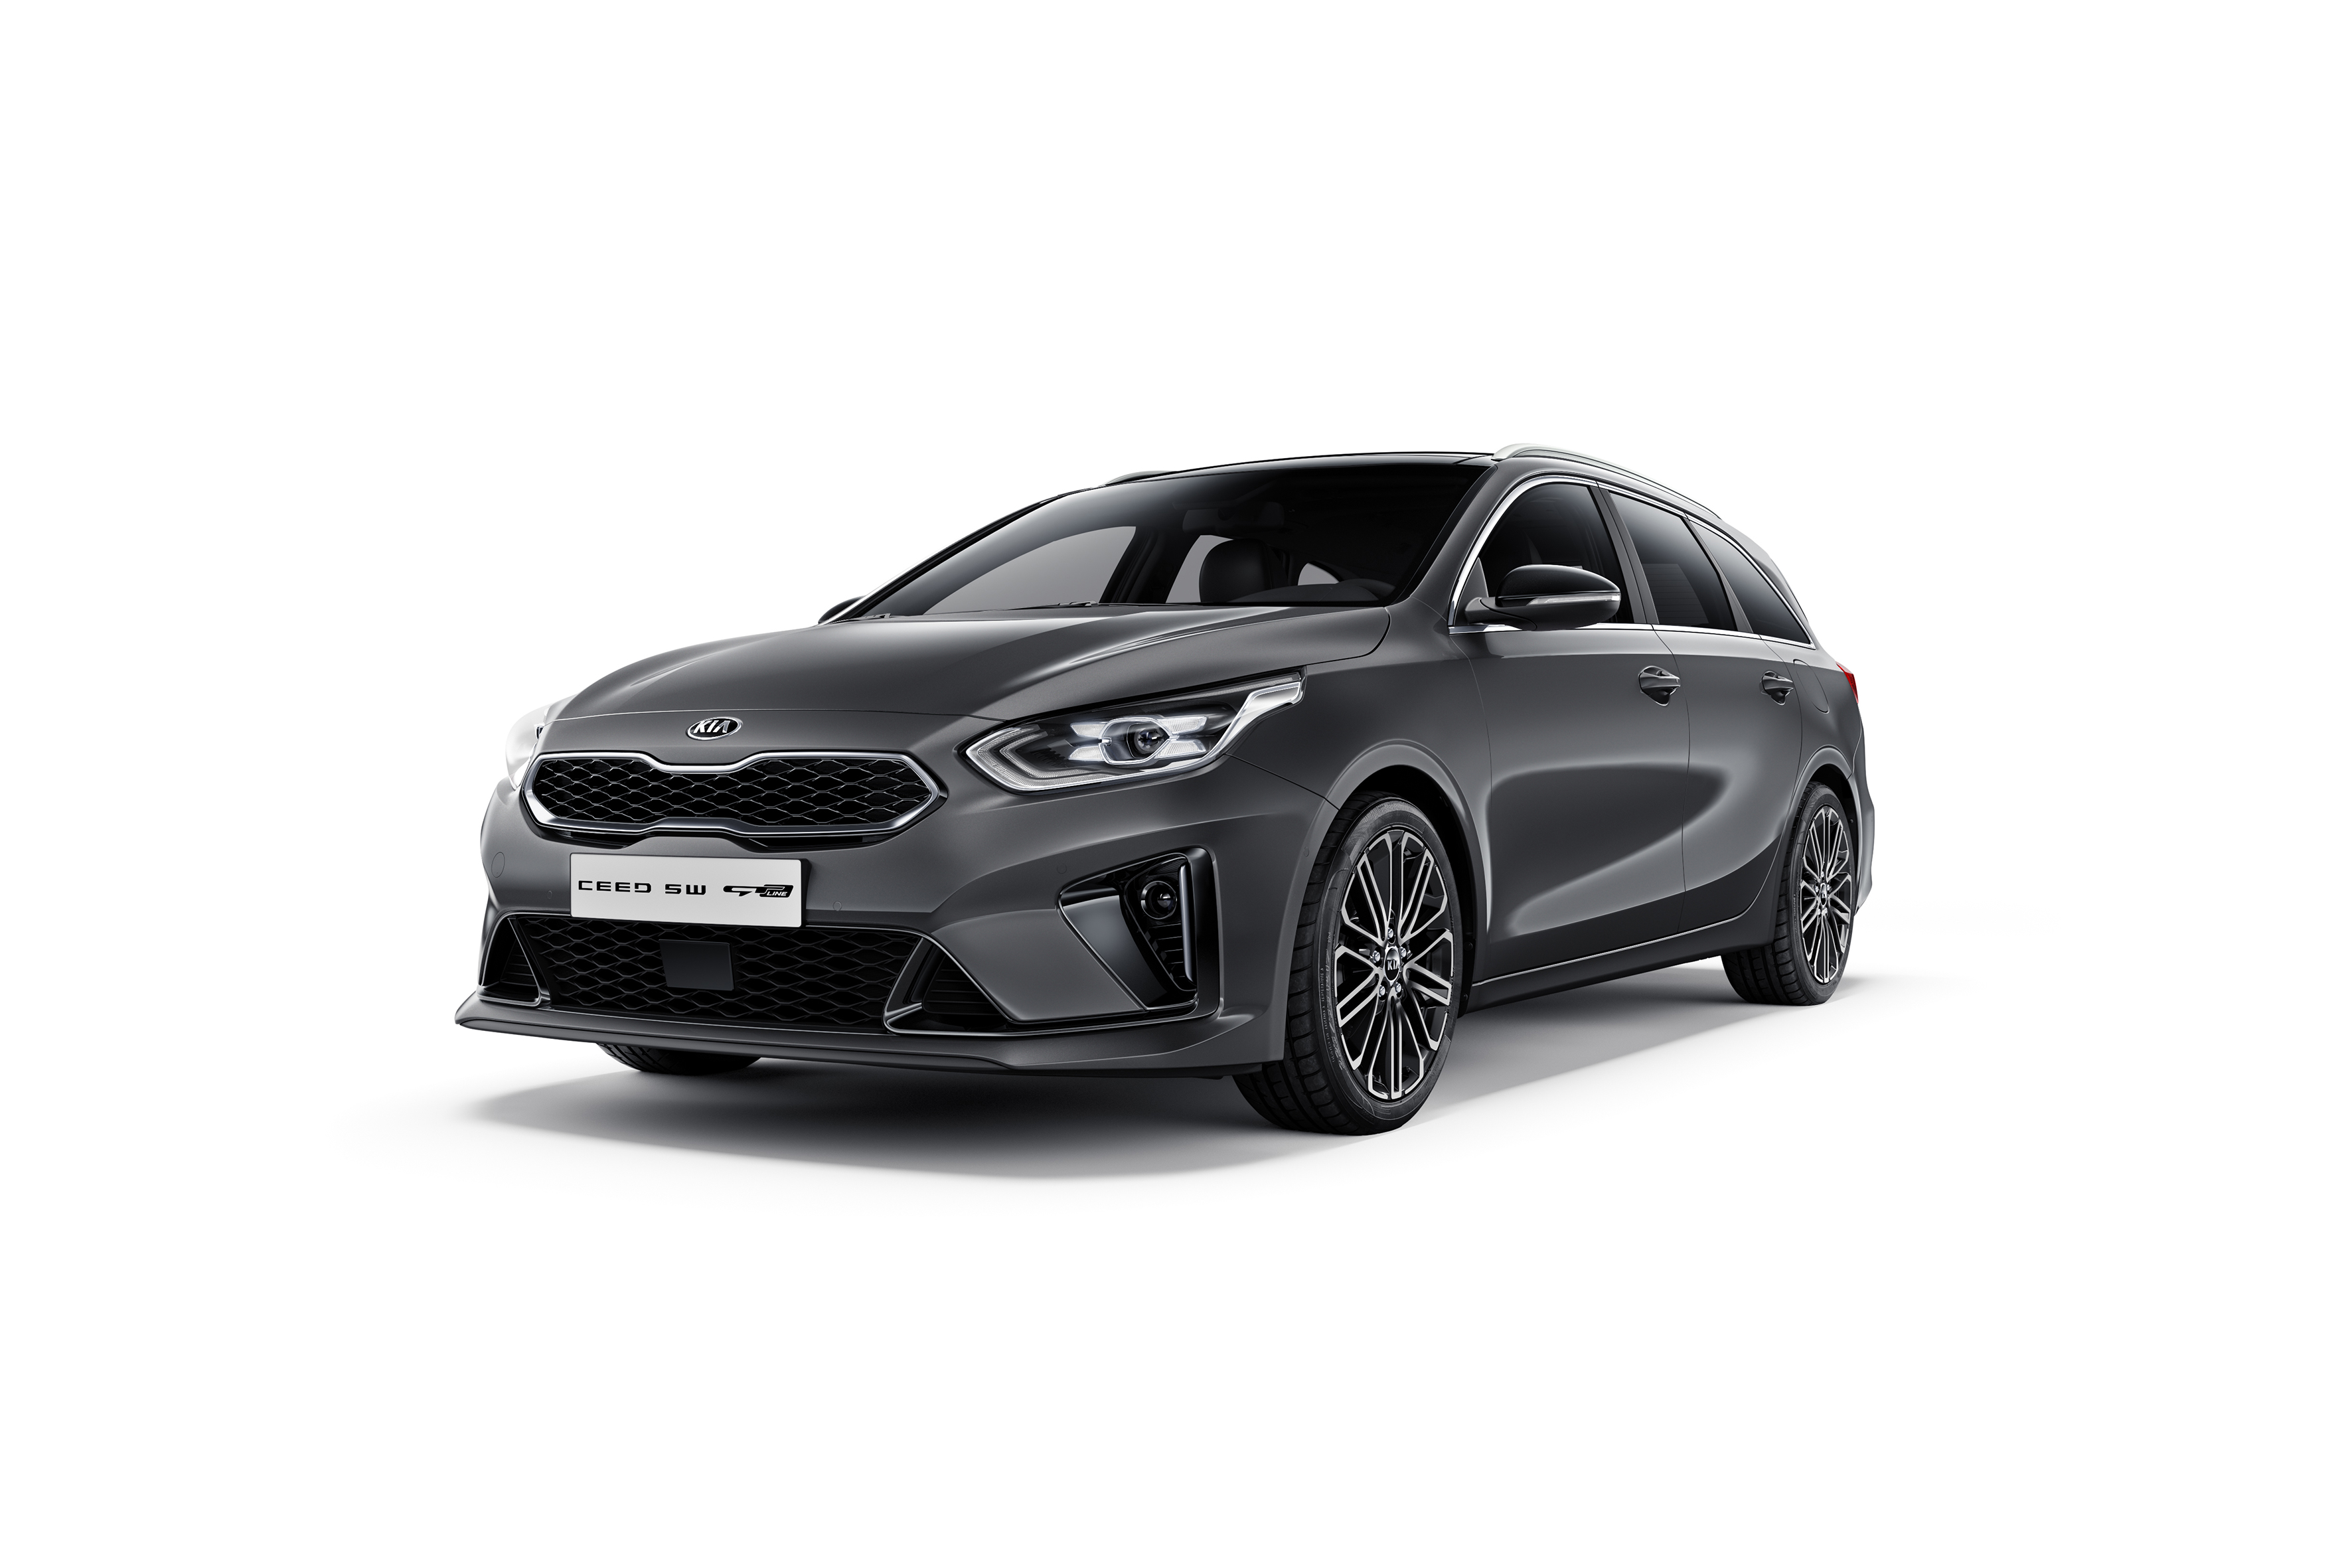 2019 Kia Ceed GT-Line Front Three-Quarter Wallpapers (9)